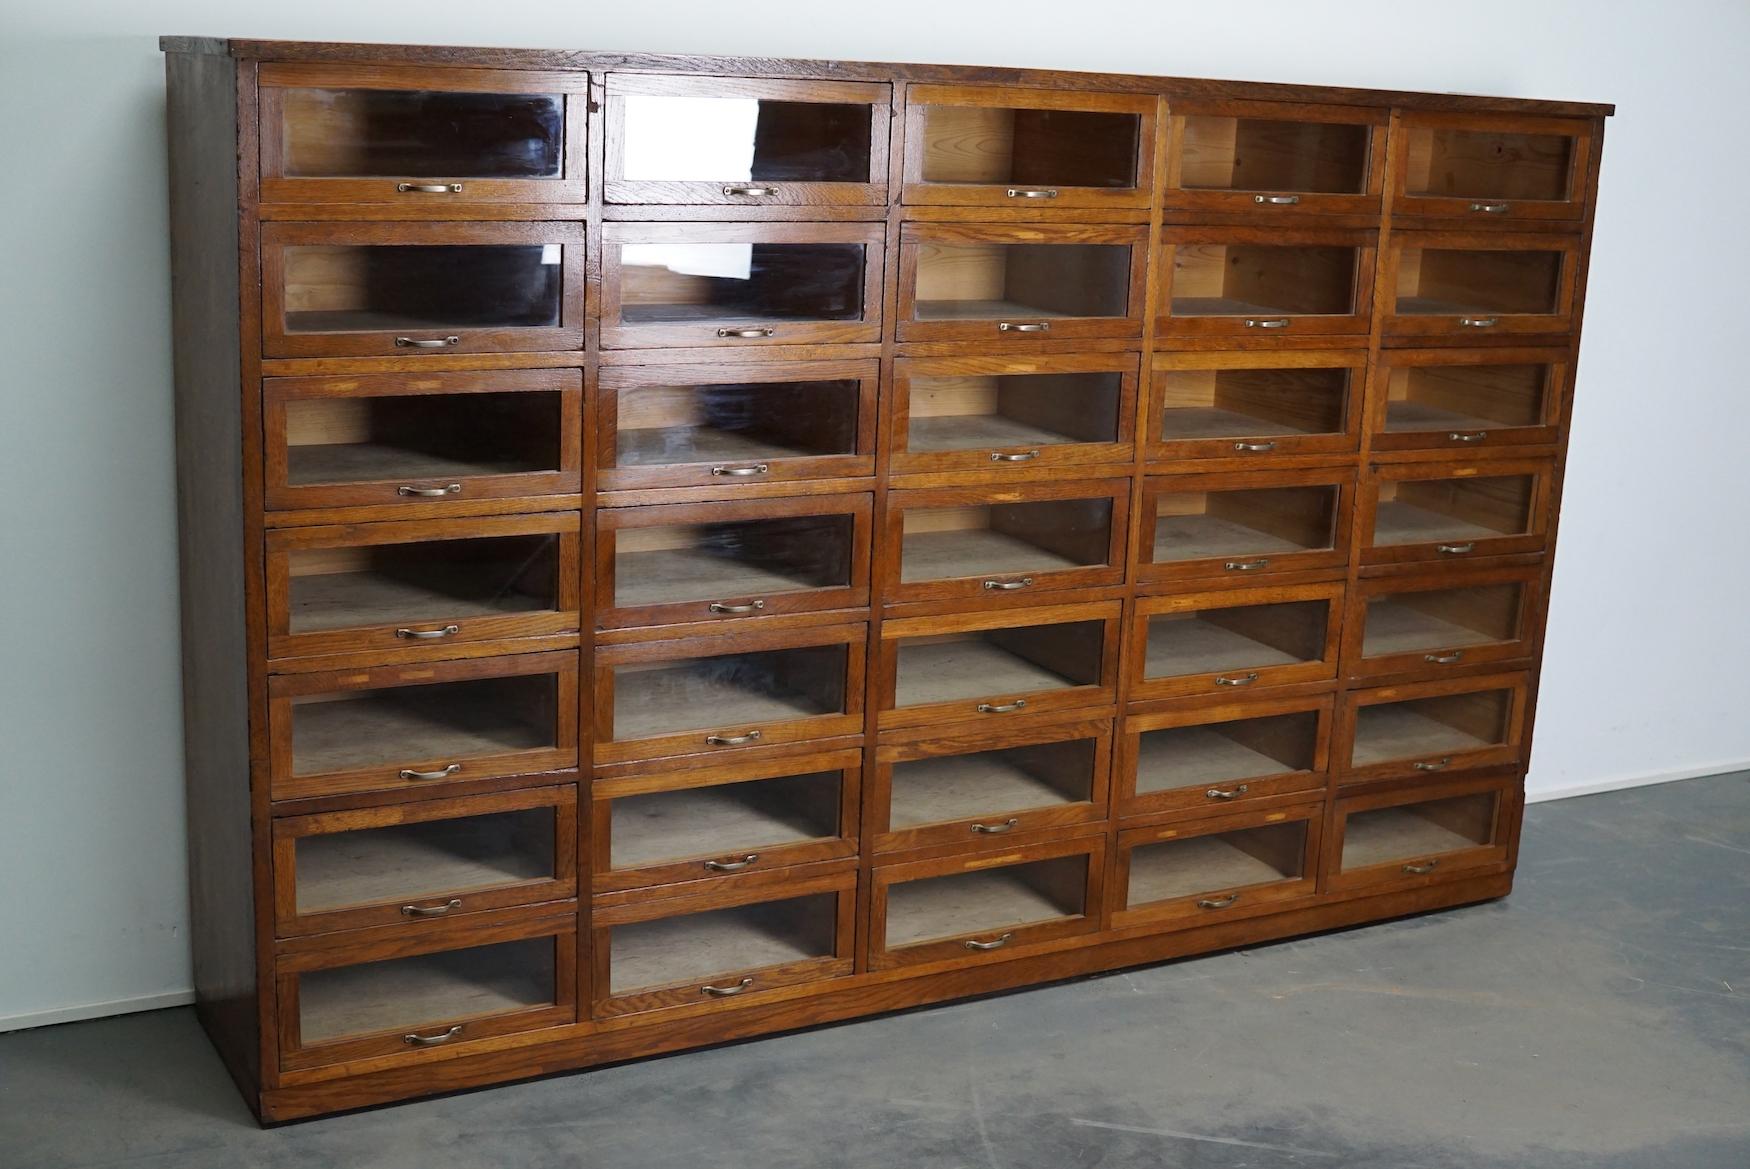 This haberdashery cabinet was produced during the 1930s in the Netherlands. This piece features 35 drawers in oak with glass fronts and metal handles. It was originally used in a shop for sewing supplies and fabrics in Amsterdam. The interior